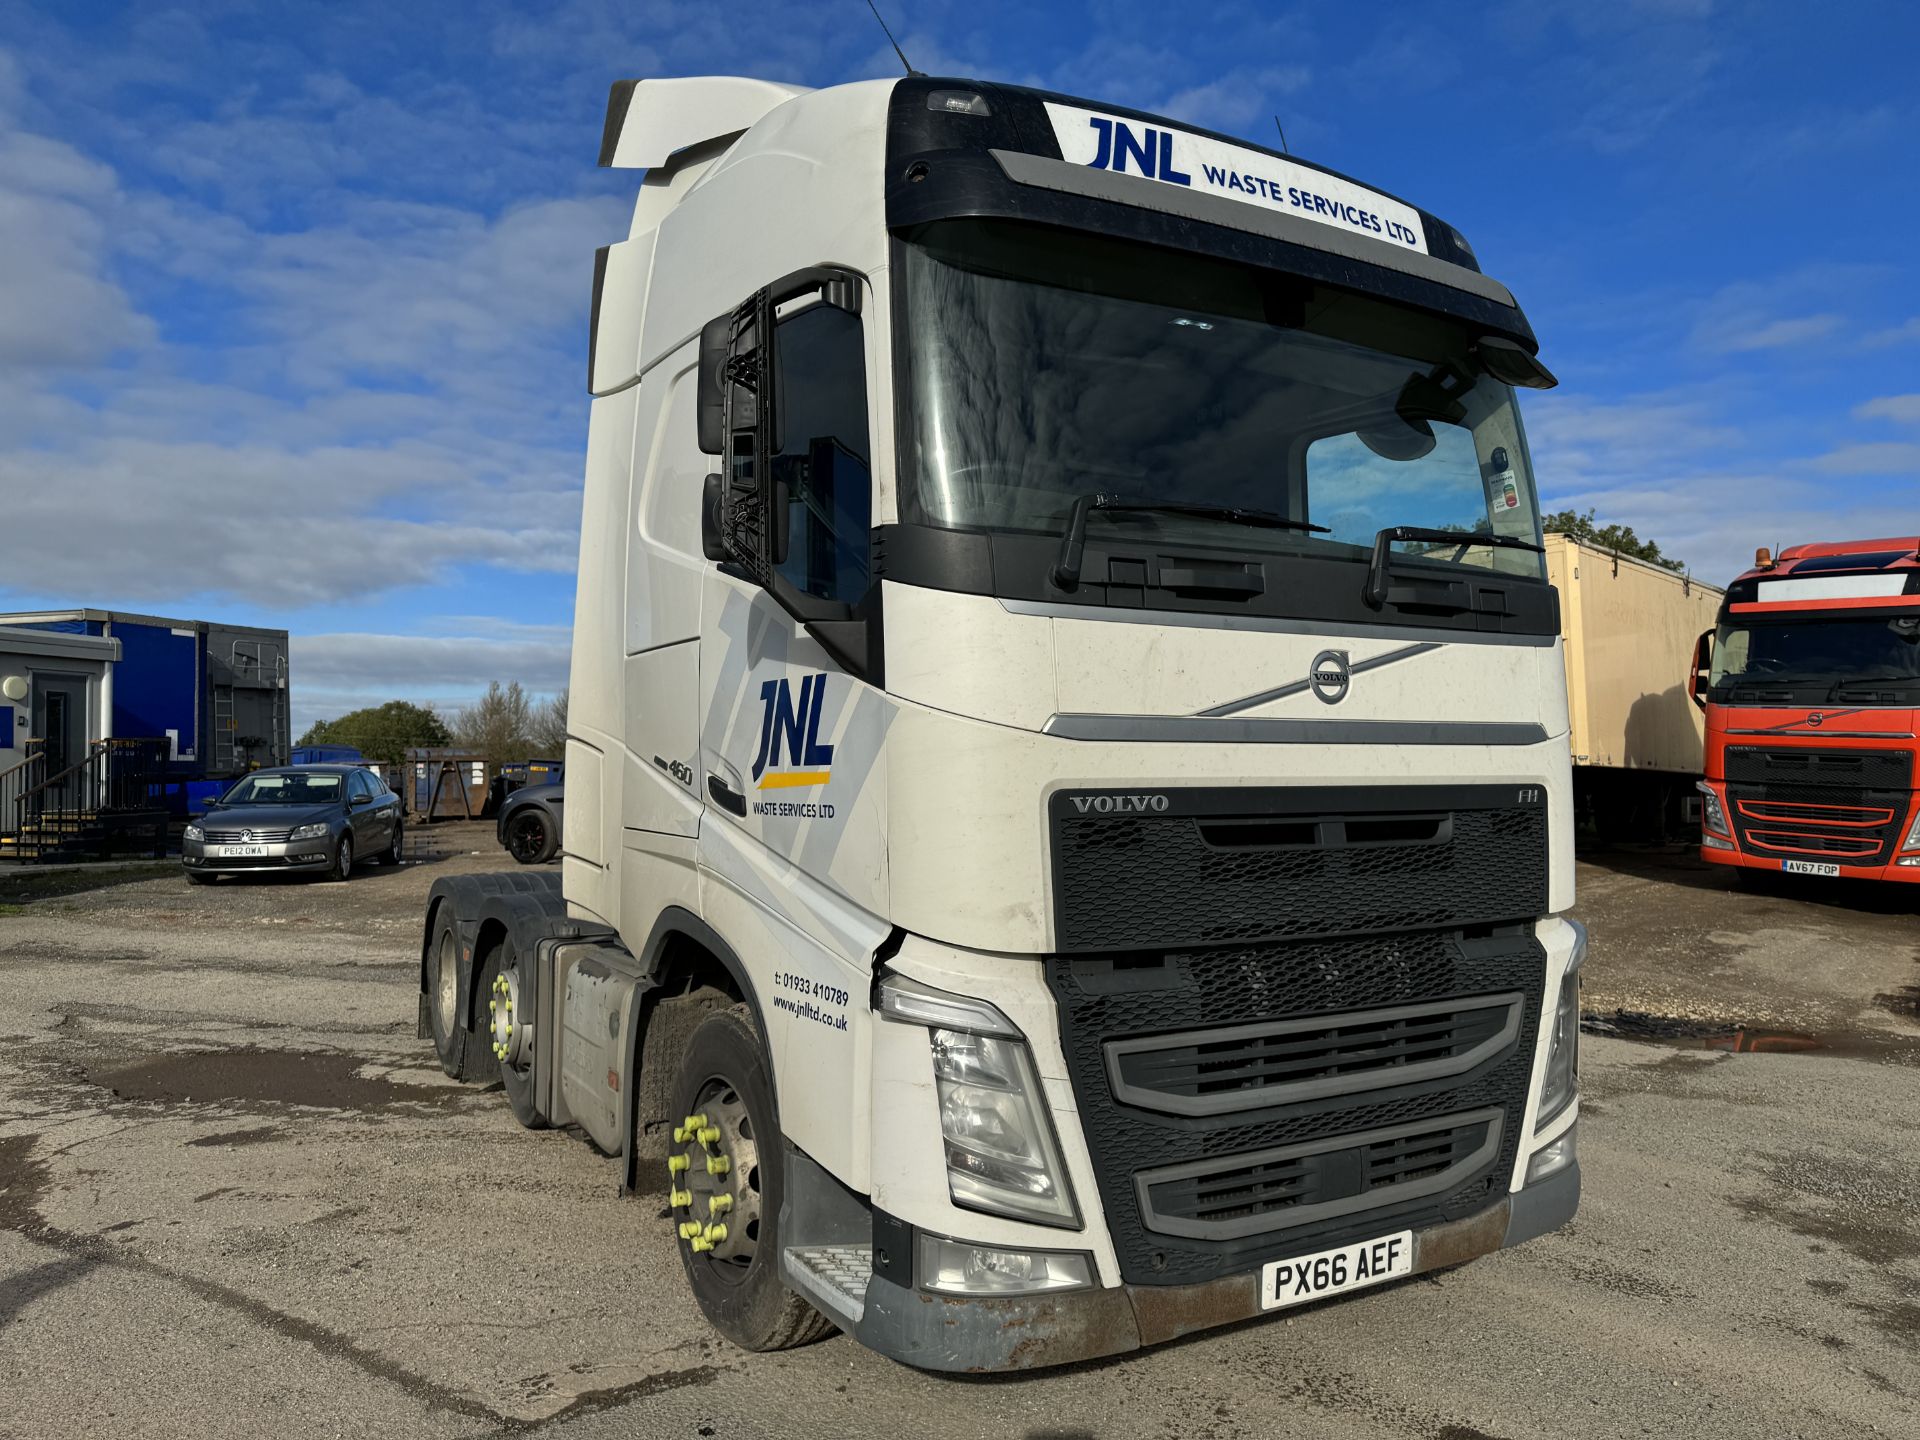 2016 - Volvo FH460 6 x 2 Euro 6 Mid Lift Tractor Unit - Image 2 of 47